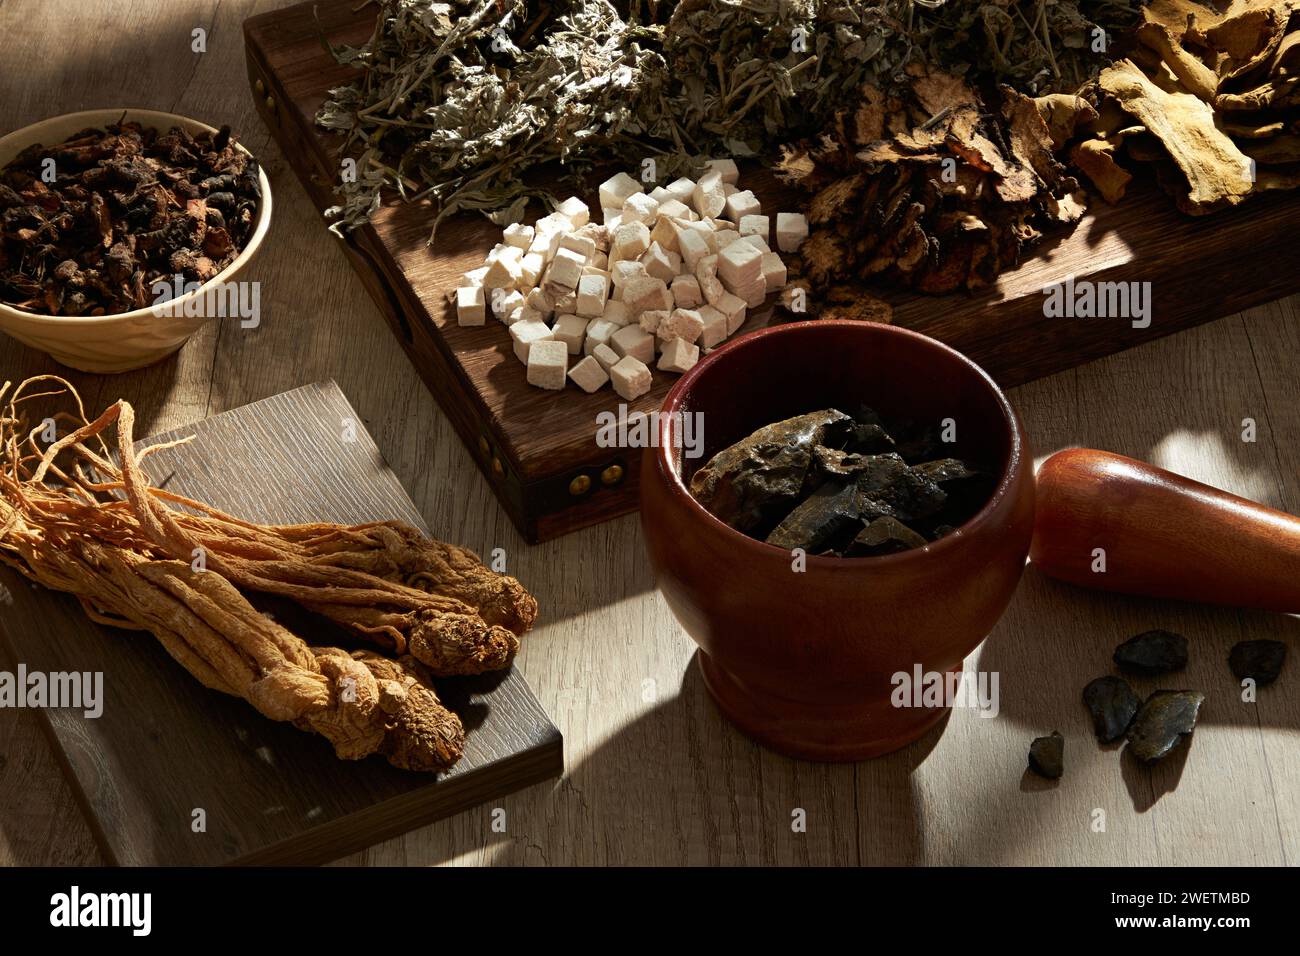 Top view of traditional herbs on wooden tray, podium, bowl, mortar and pestle on wooden table background. Herbal collection for the preparation of a t Stock Photo